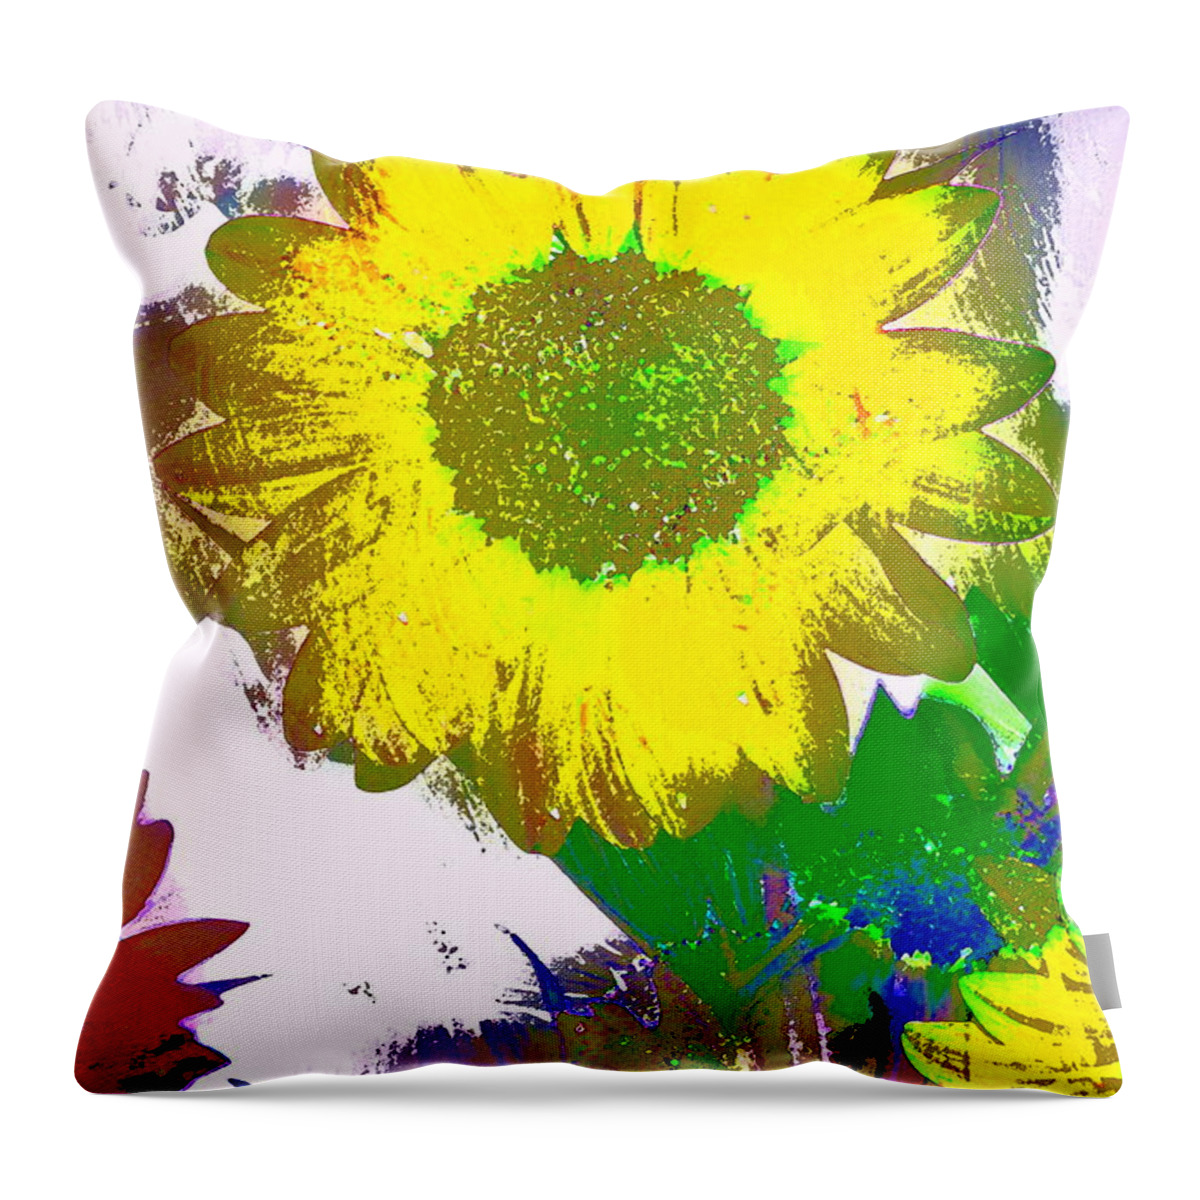 Floral Throw Pillow featuring the photograph Sunflower 30 by Pamela Cooper